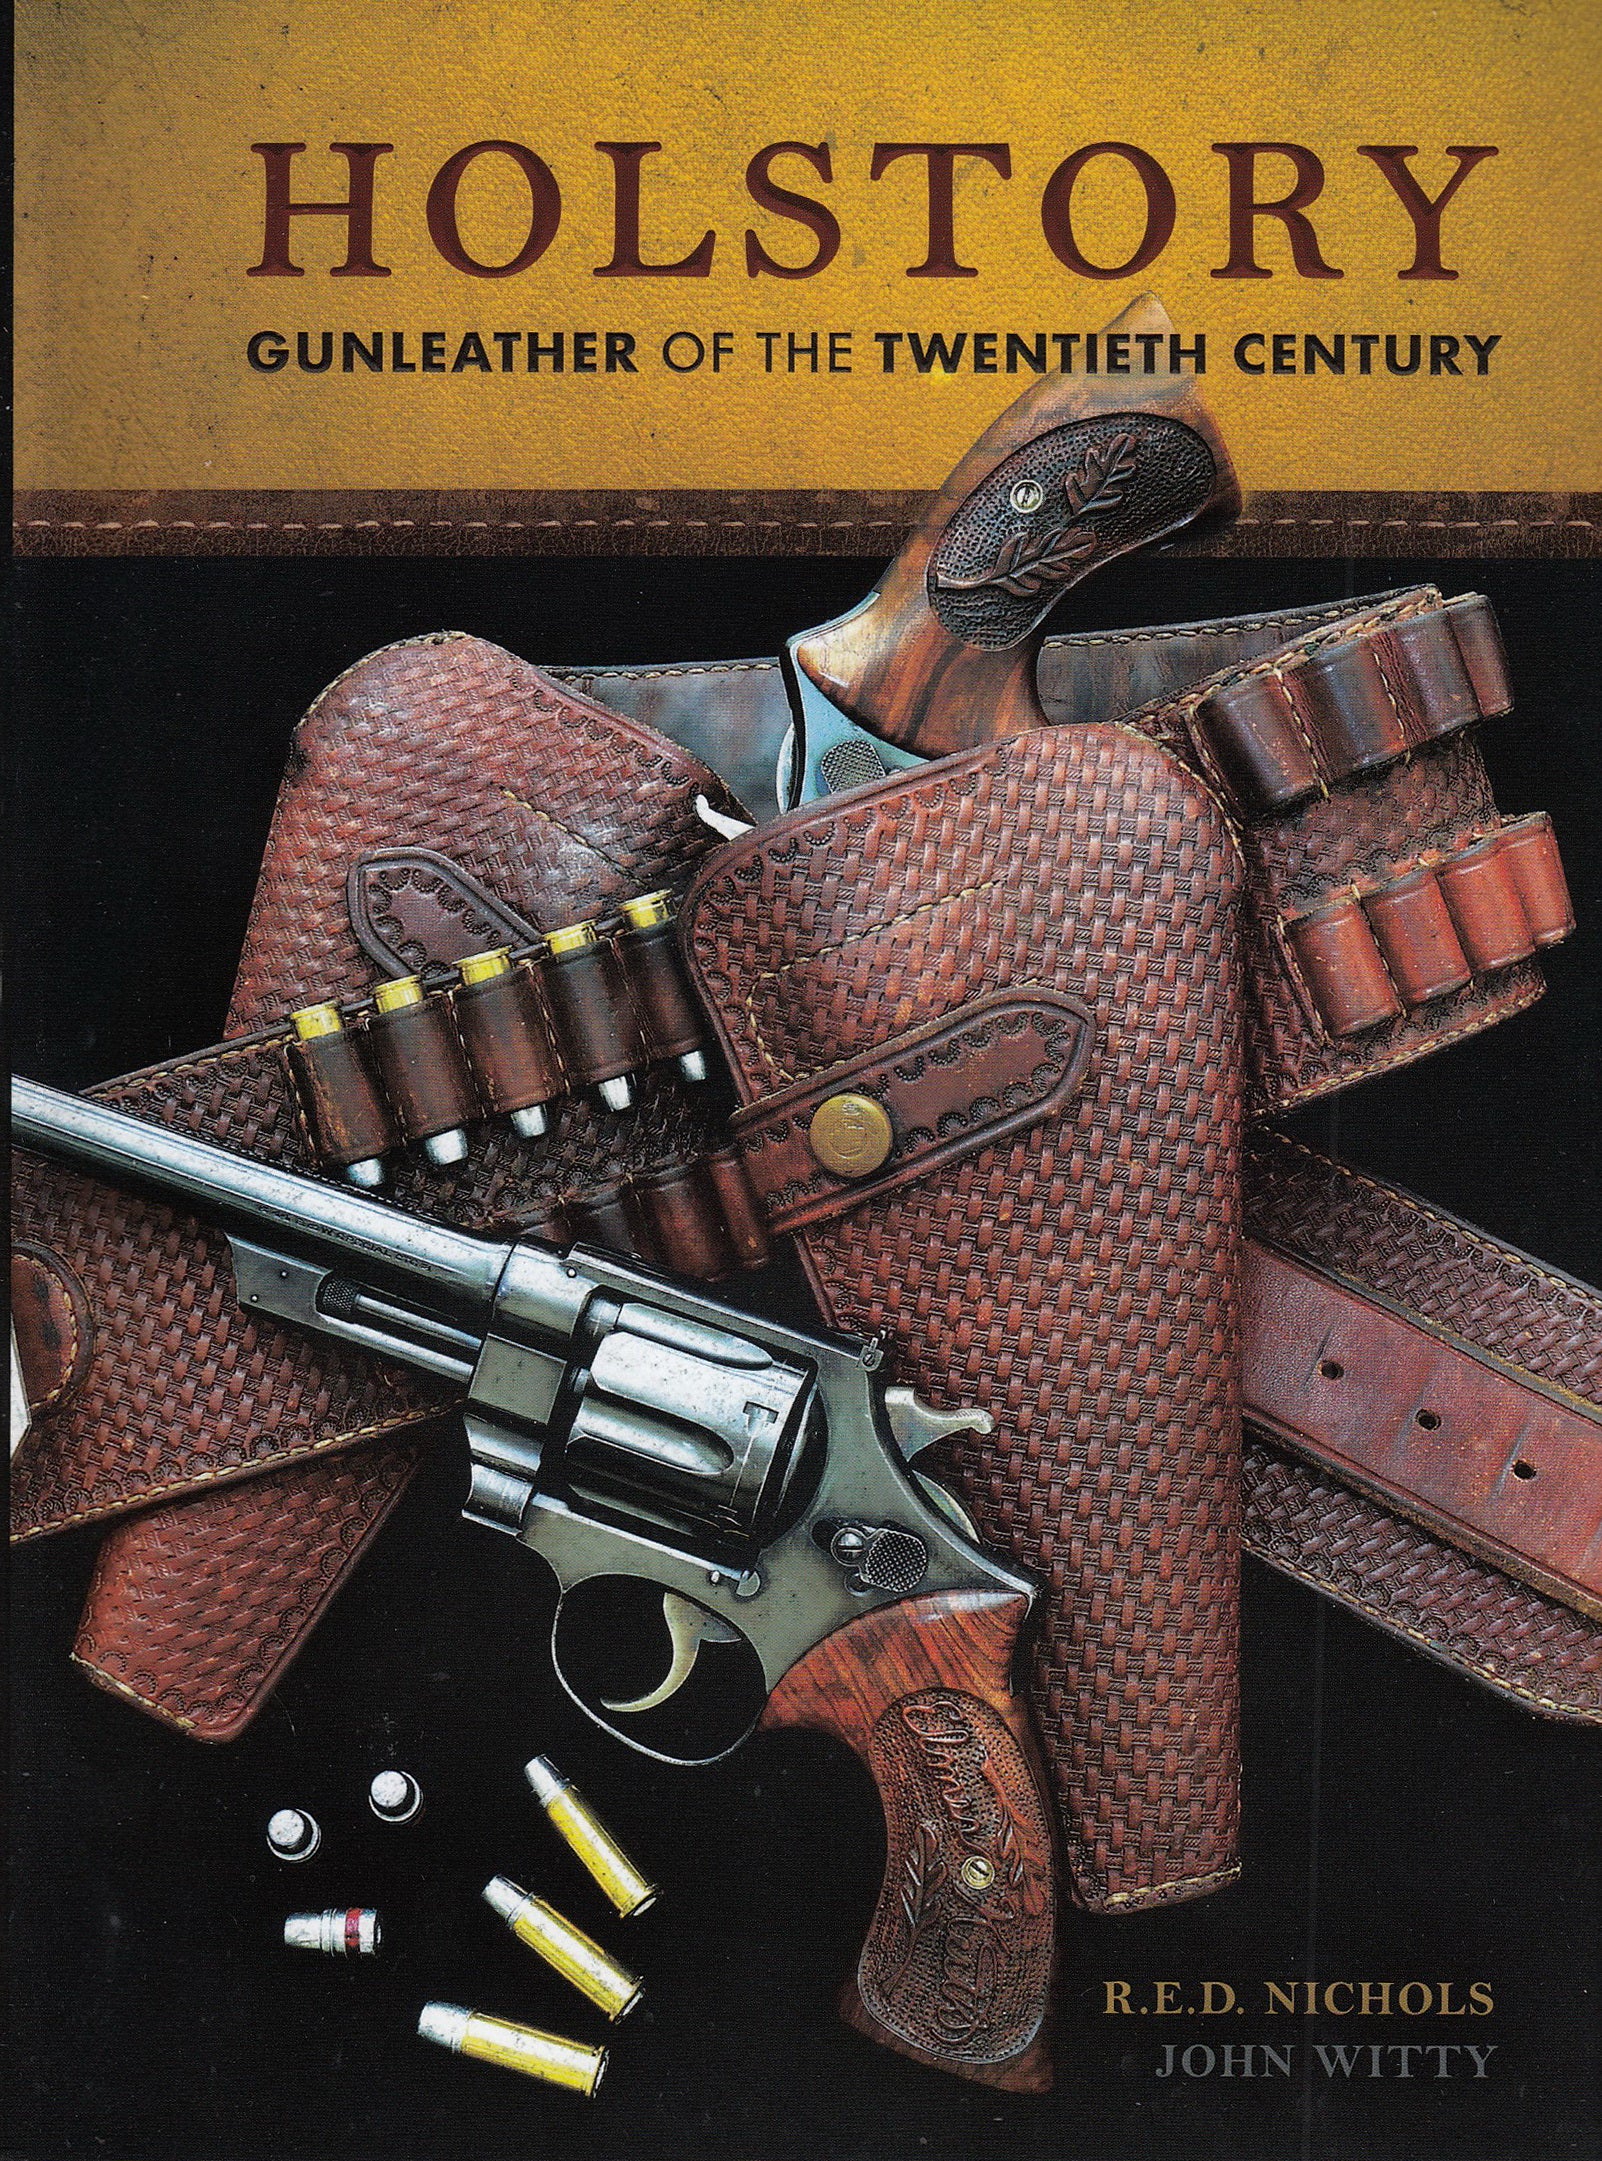 Holstory: Gunleather of the 20th Century